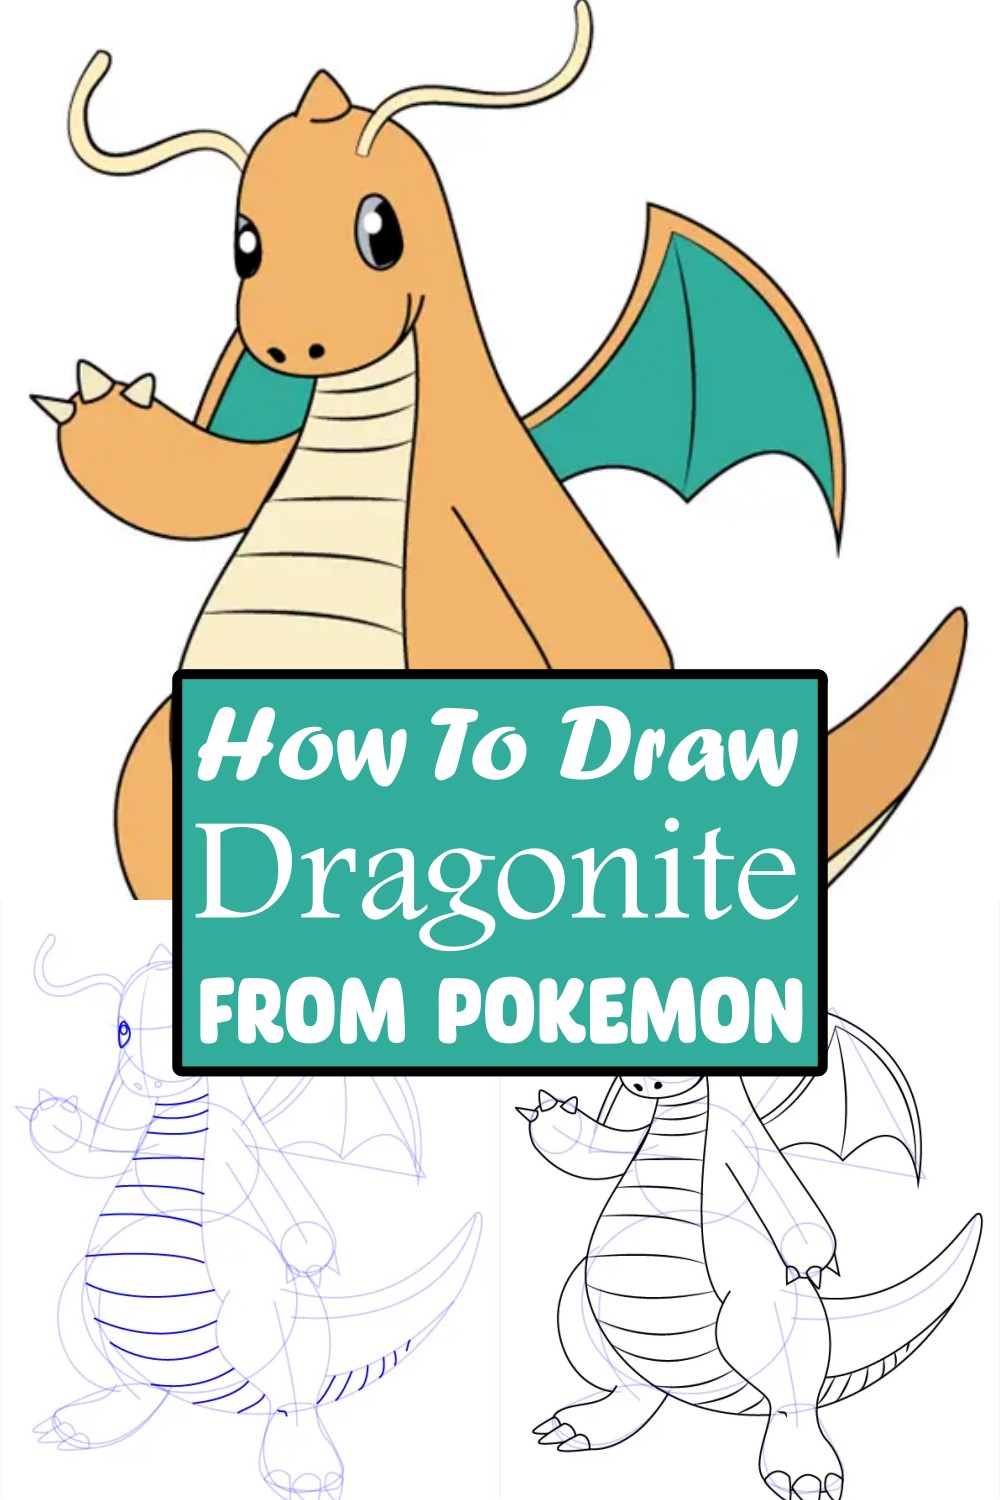 How To Draw Dragonite From Pokemon